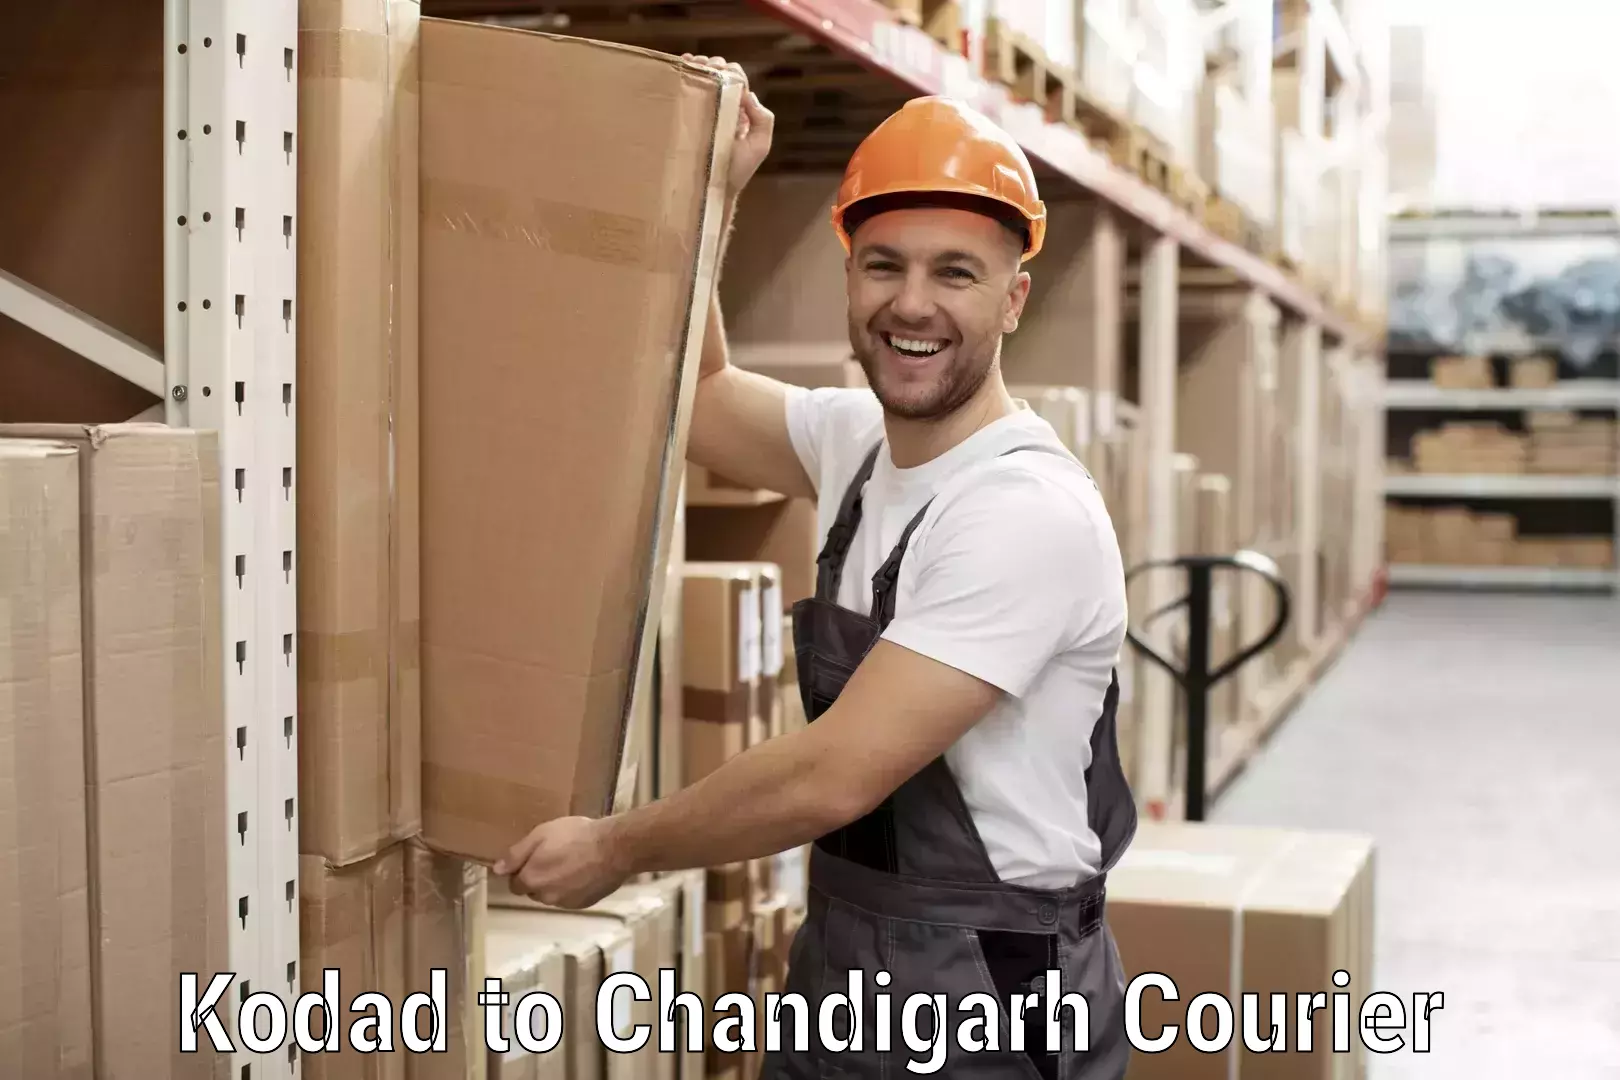 Enhanced tracking features Kodad to Chandigarh